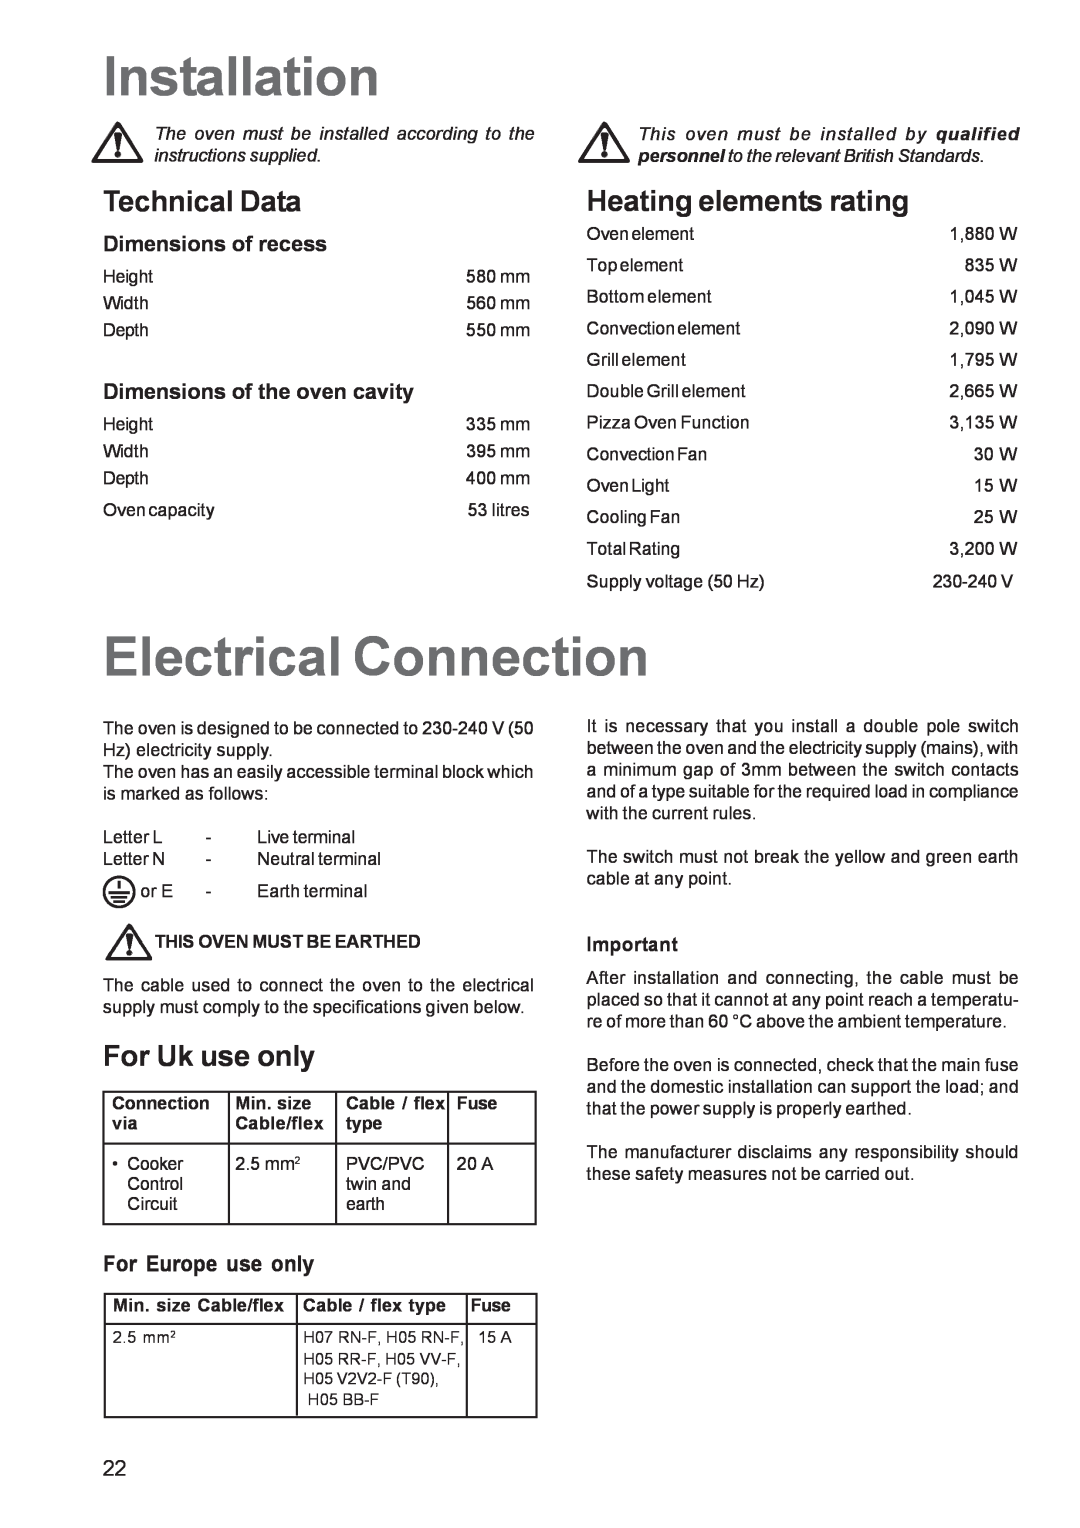 Zanussi ZOB 1060 Installation, Electrical Connection, Technical Data, Heating elements rating, For Uk use only, Min. size 